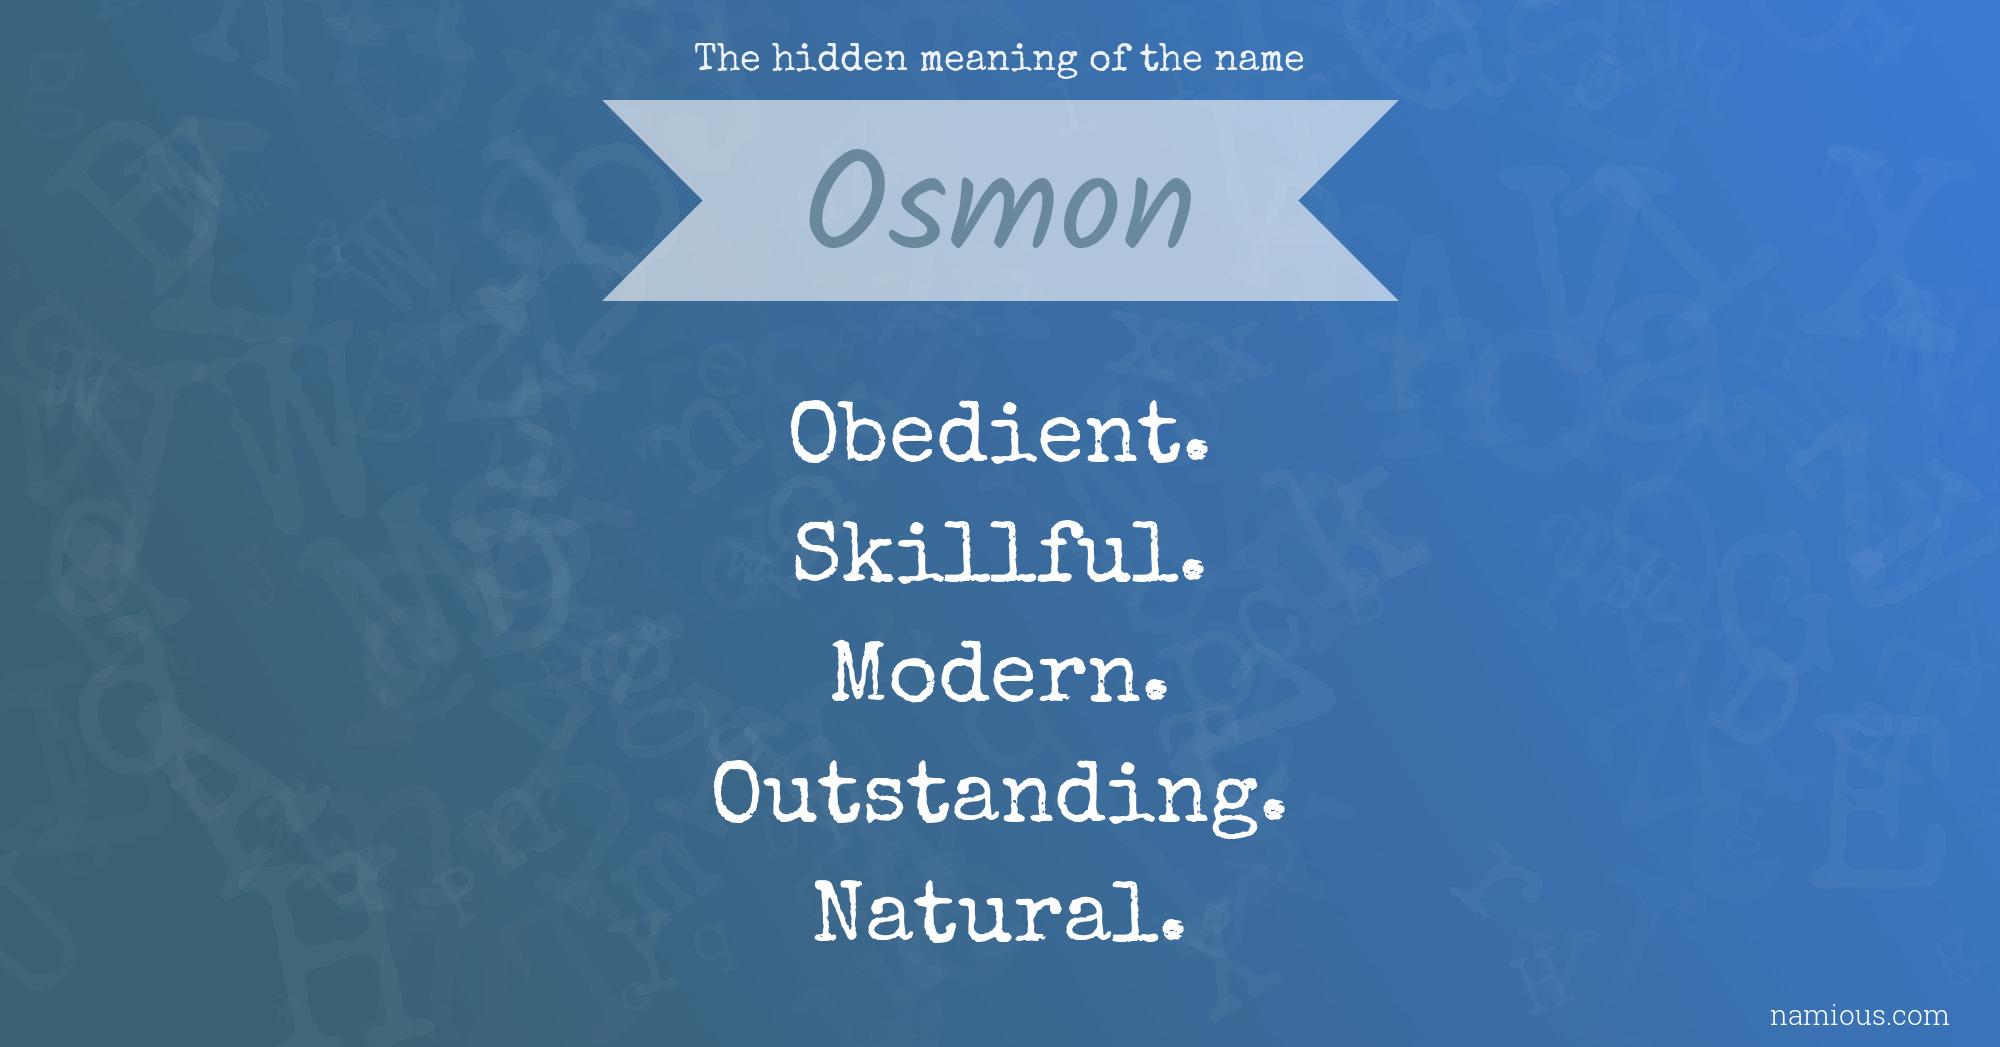 The hidden meaning of the name Osmon